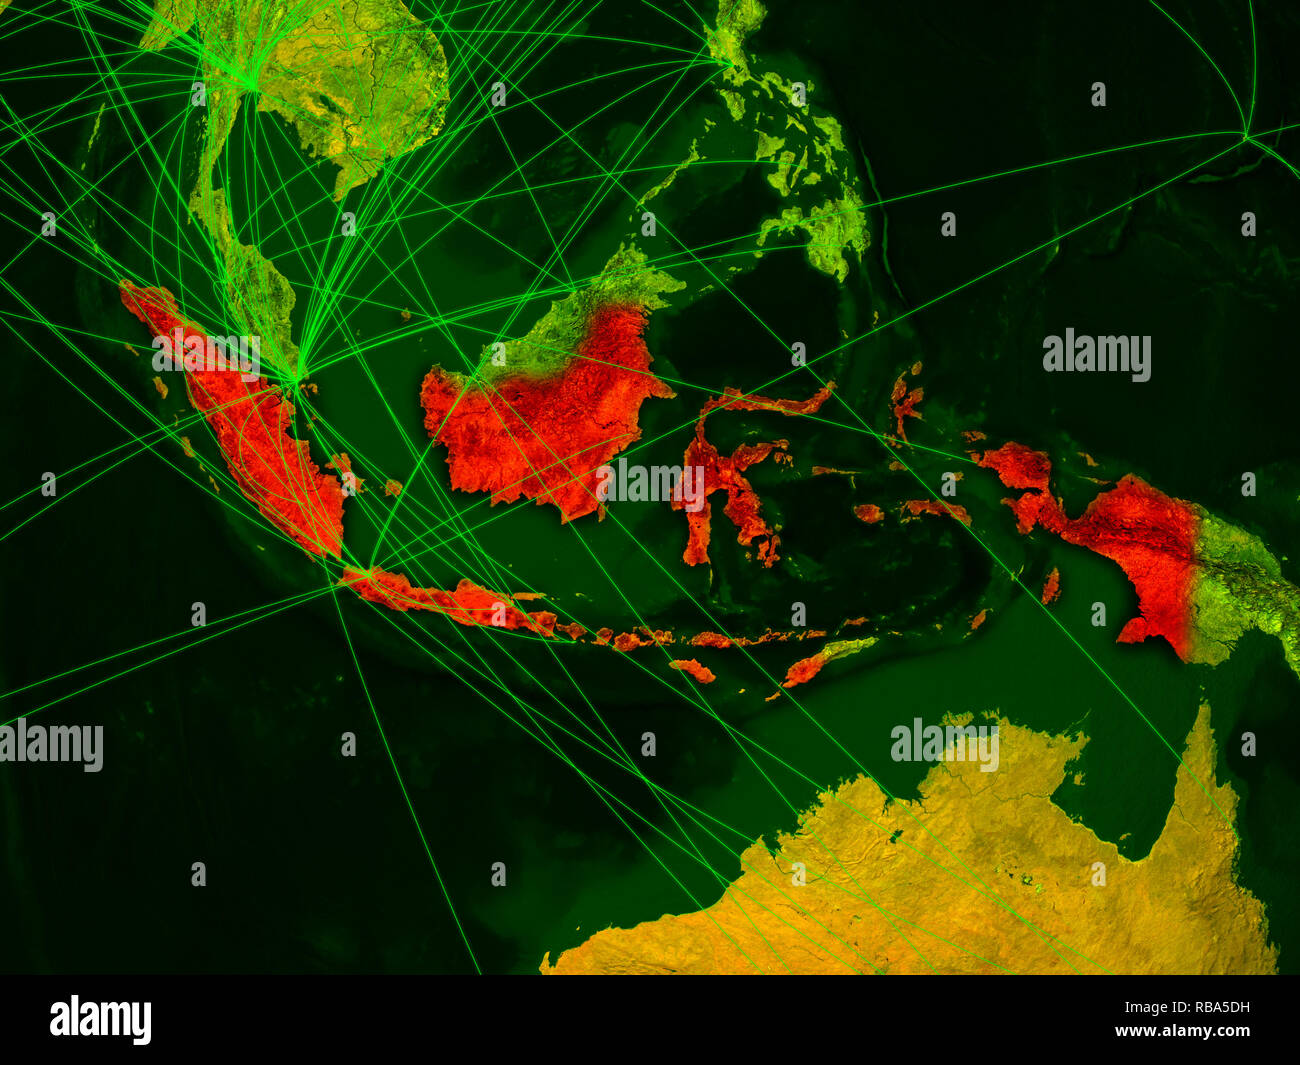 Indonesia on digital map with networks. Concept of international travel, communication and technology. 3D illustration. Elements of this image furnish Stock Photo